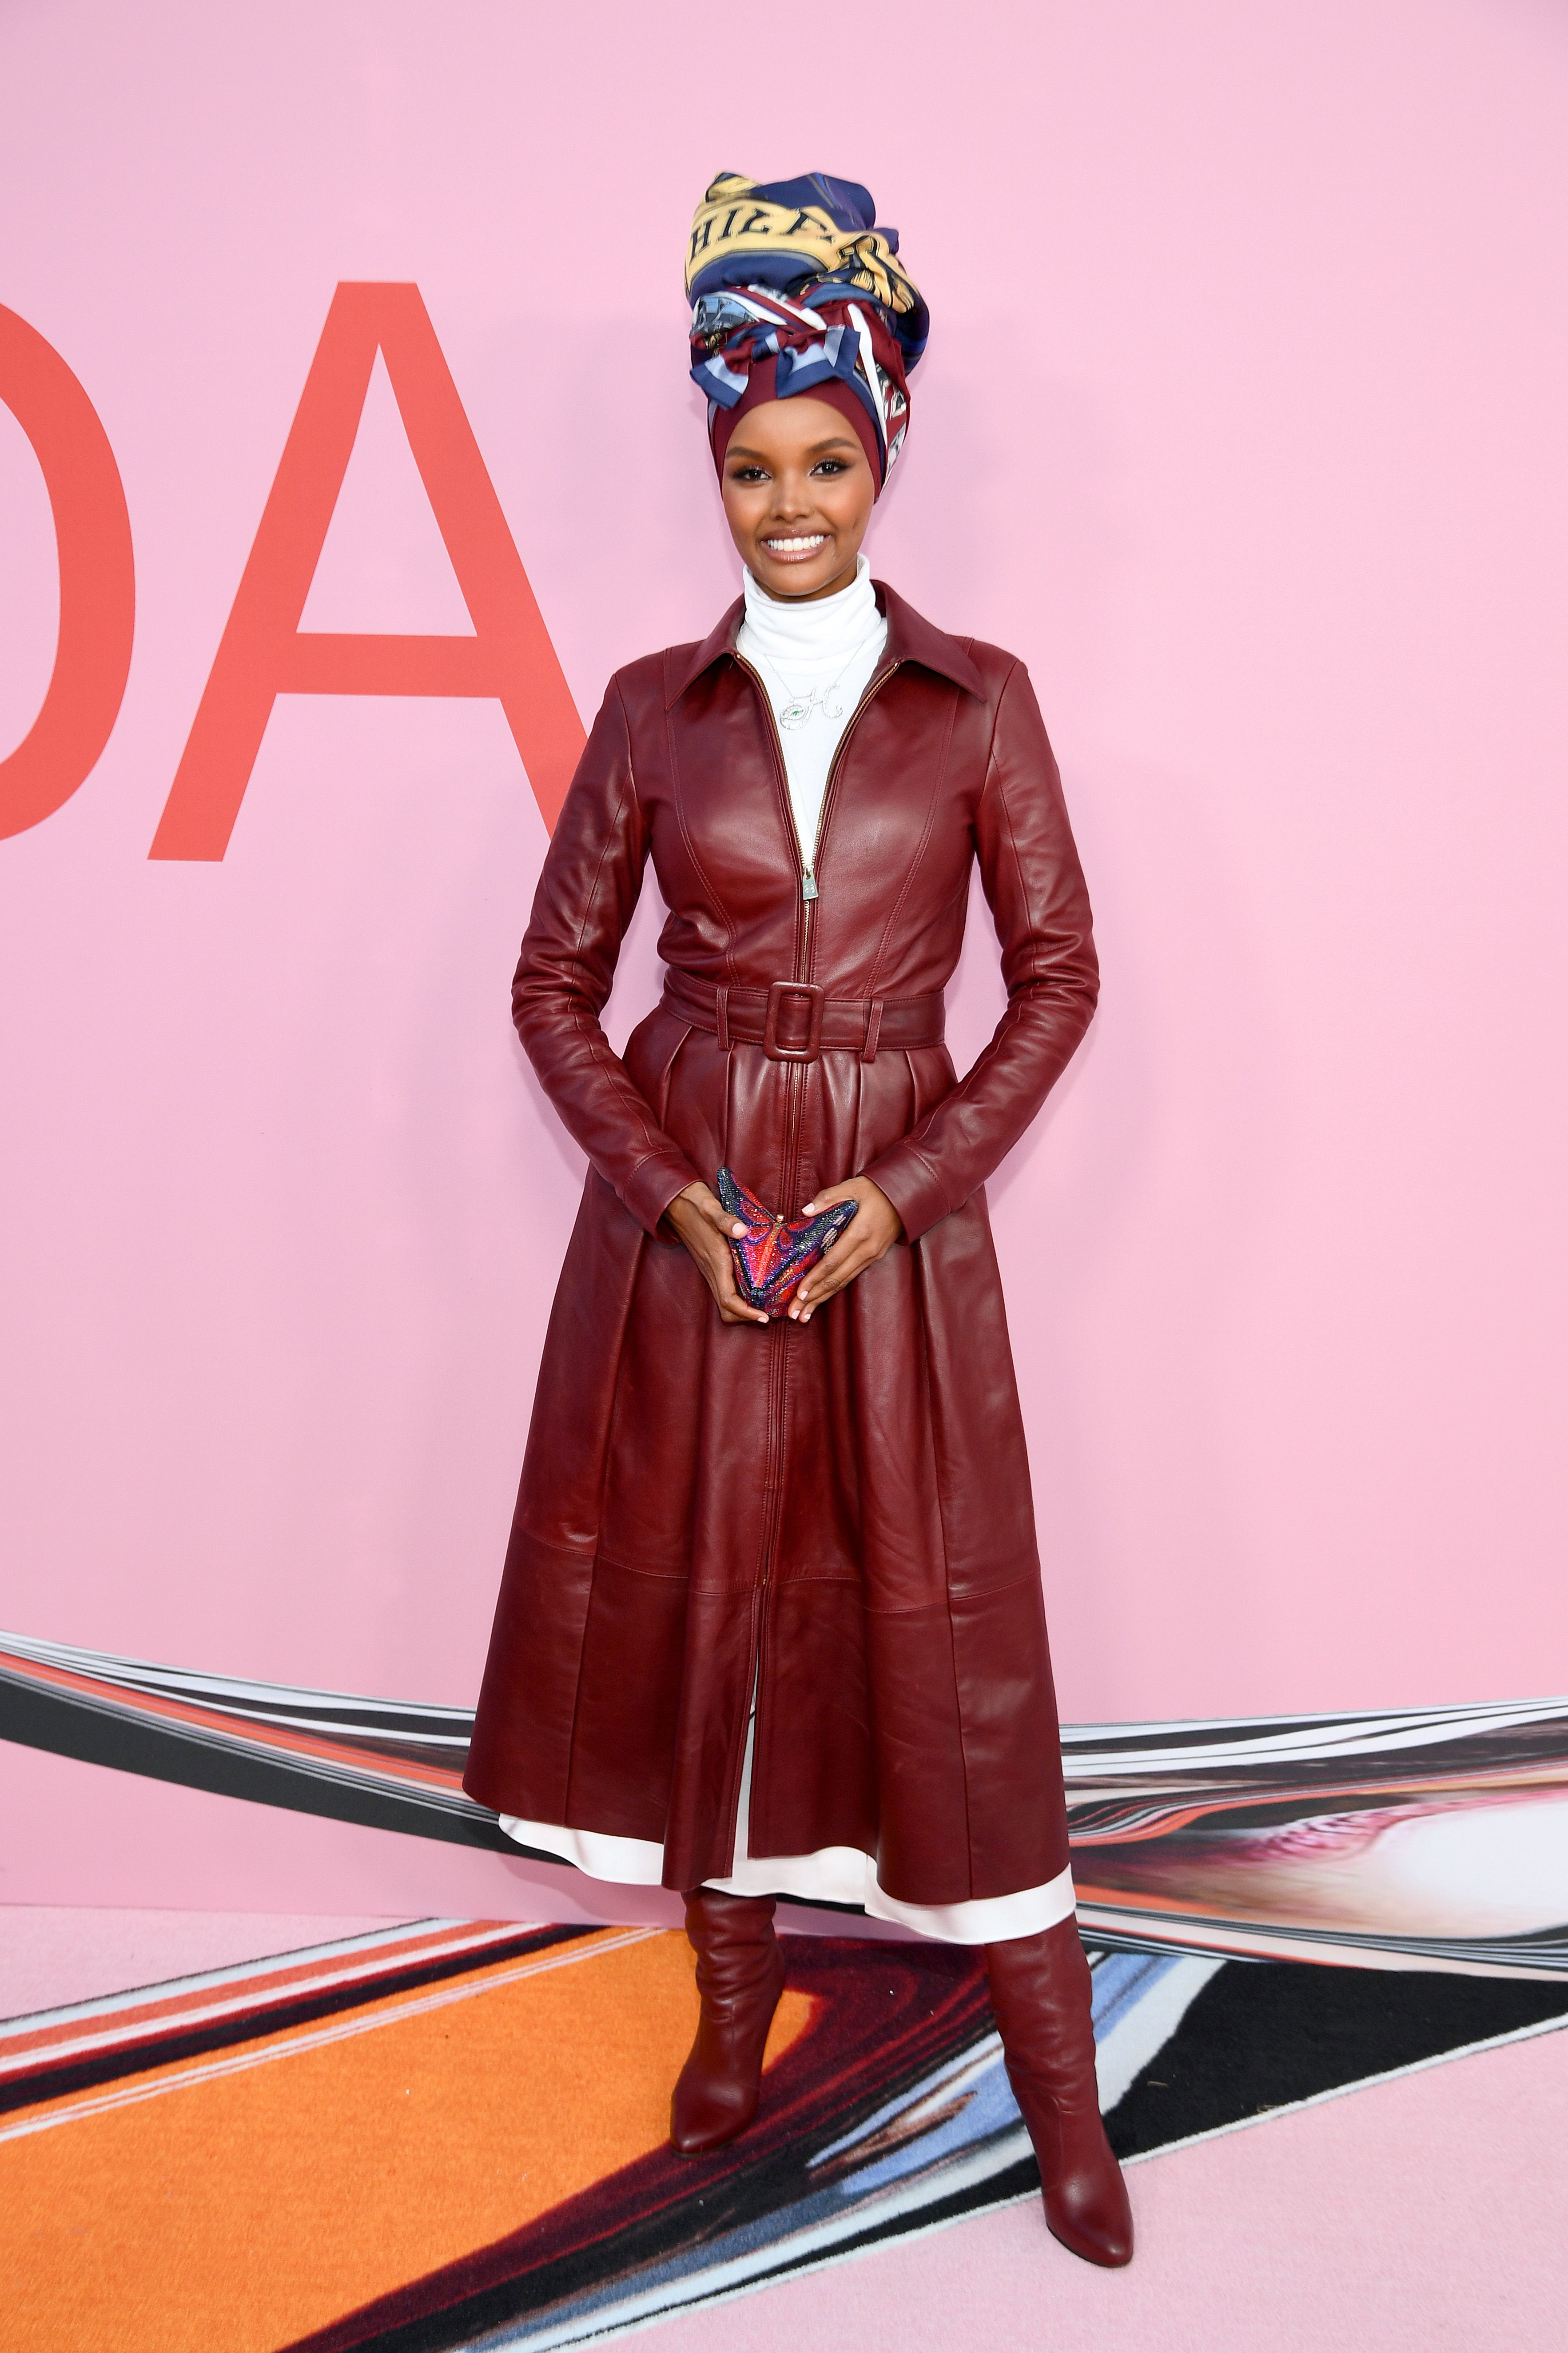 Check out the African style stars that have made the 2019 CFDA